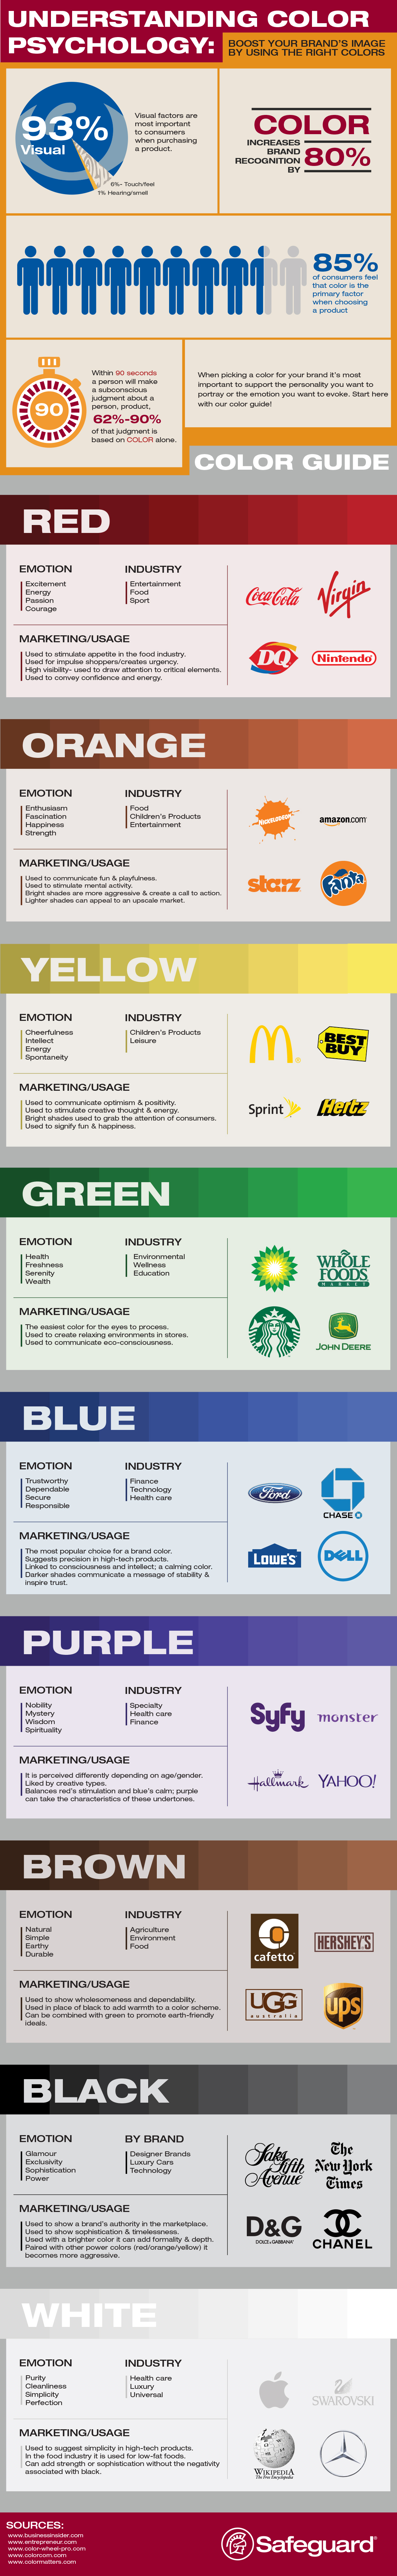 What can color do for your brand?